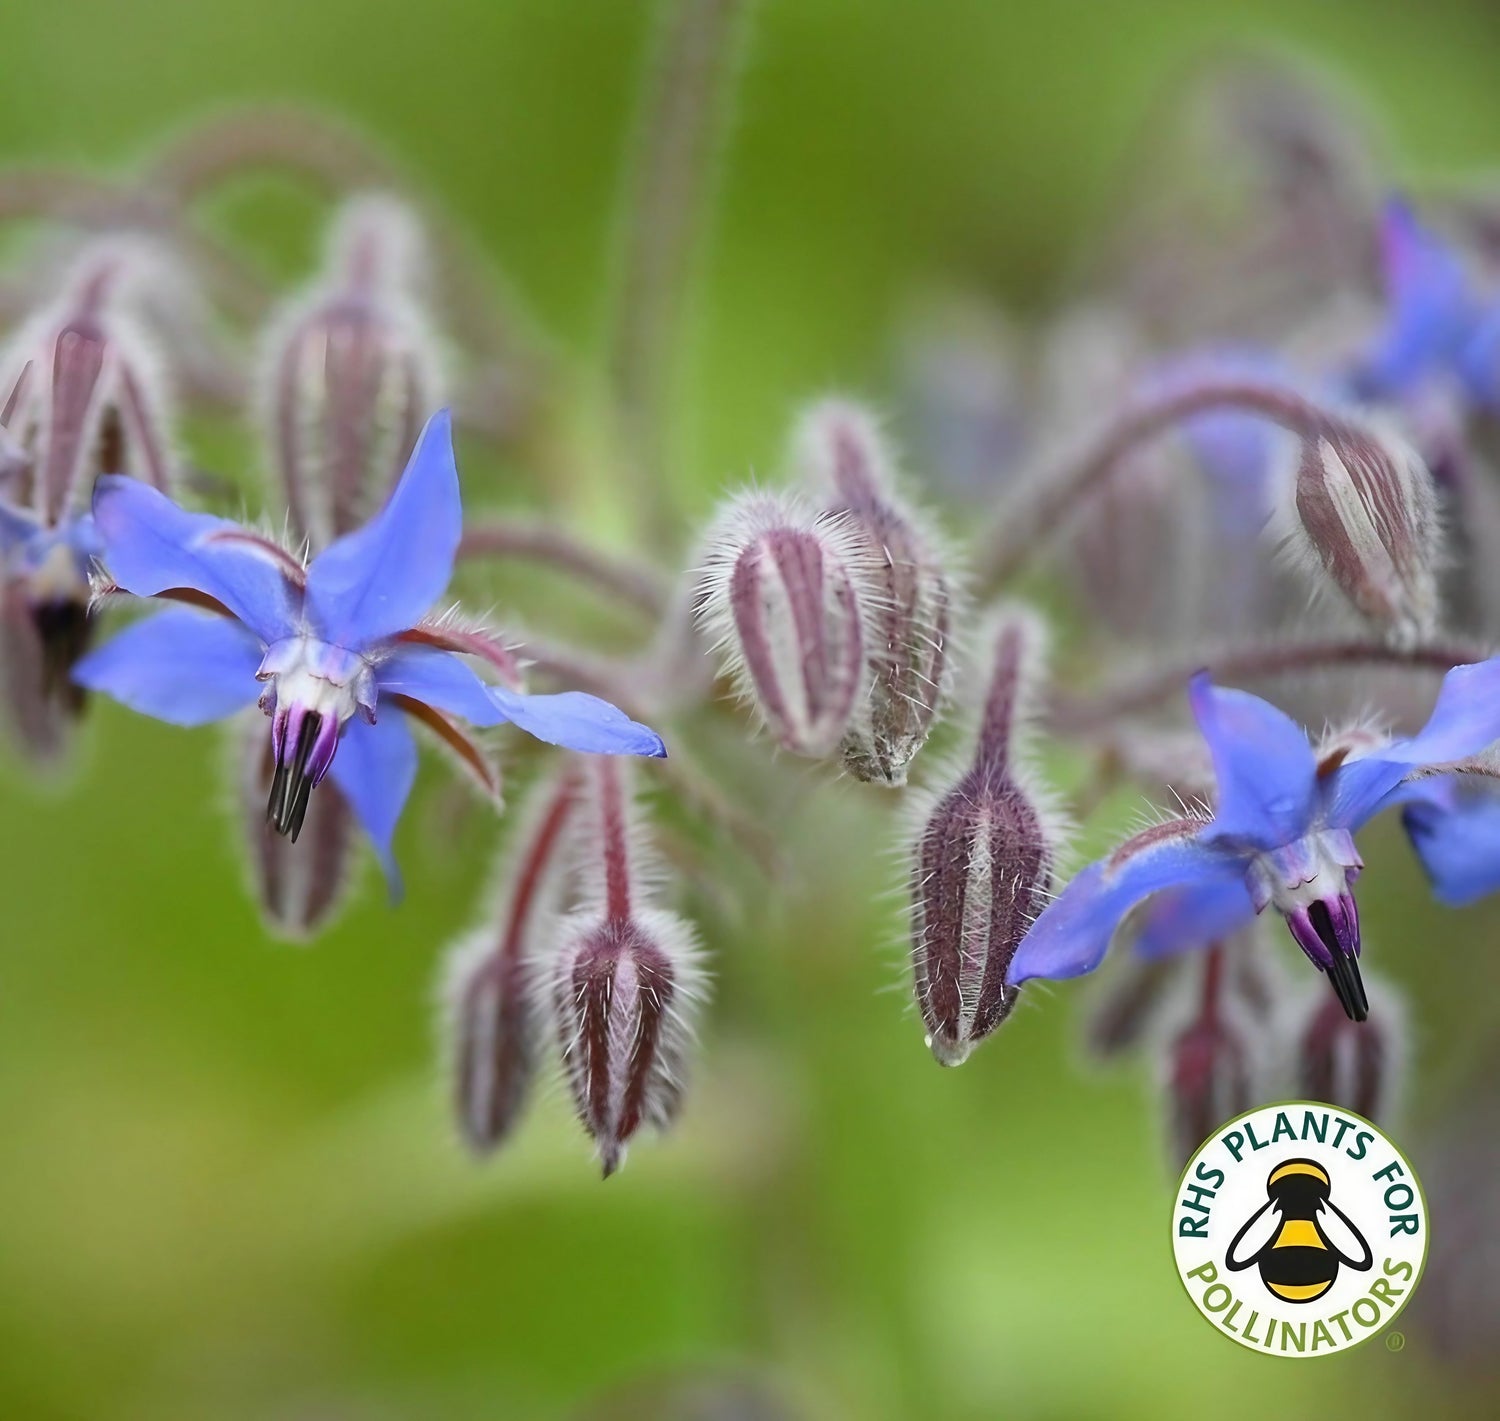 Detailed view of borage flowers with blue petals